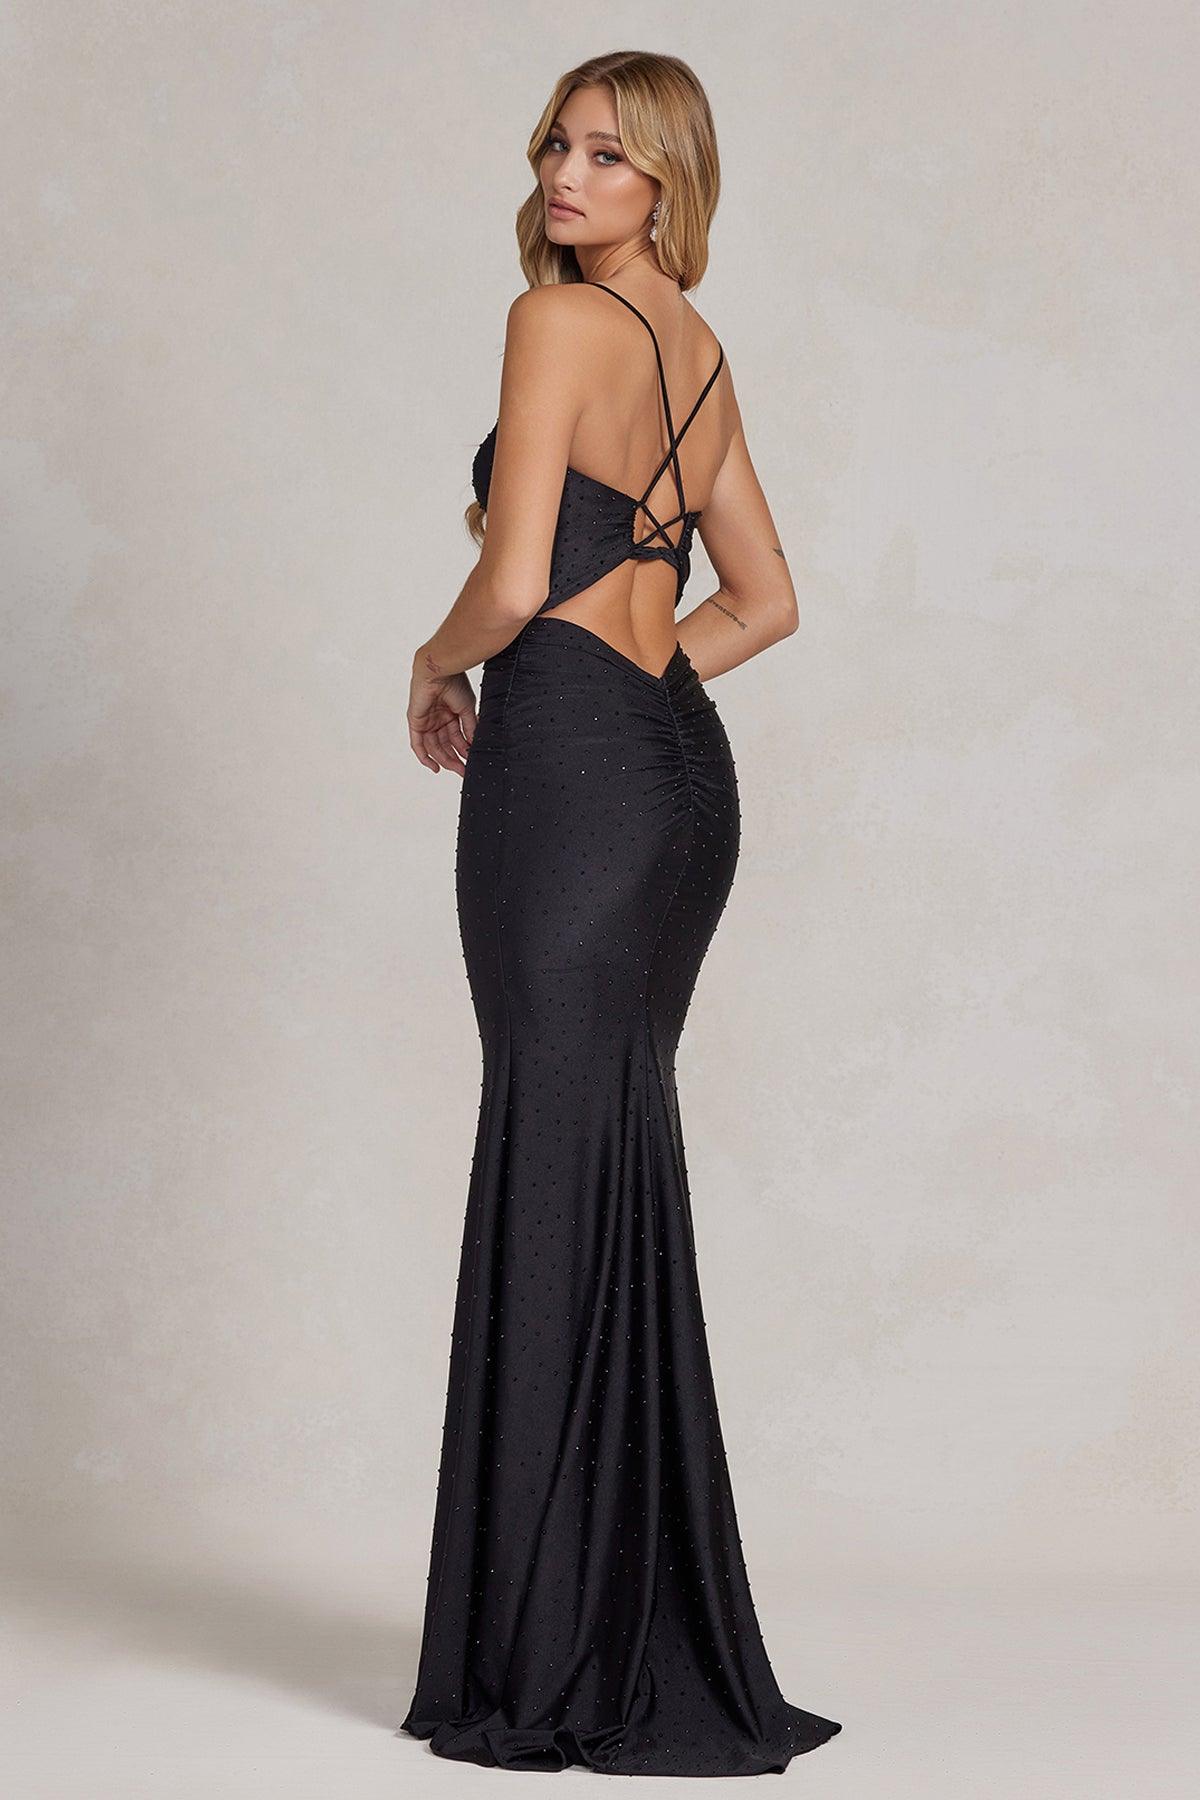 Black Nox Anabel K1123 Prom Long Formal Trumpet Gown for $189.99 – The ...